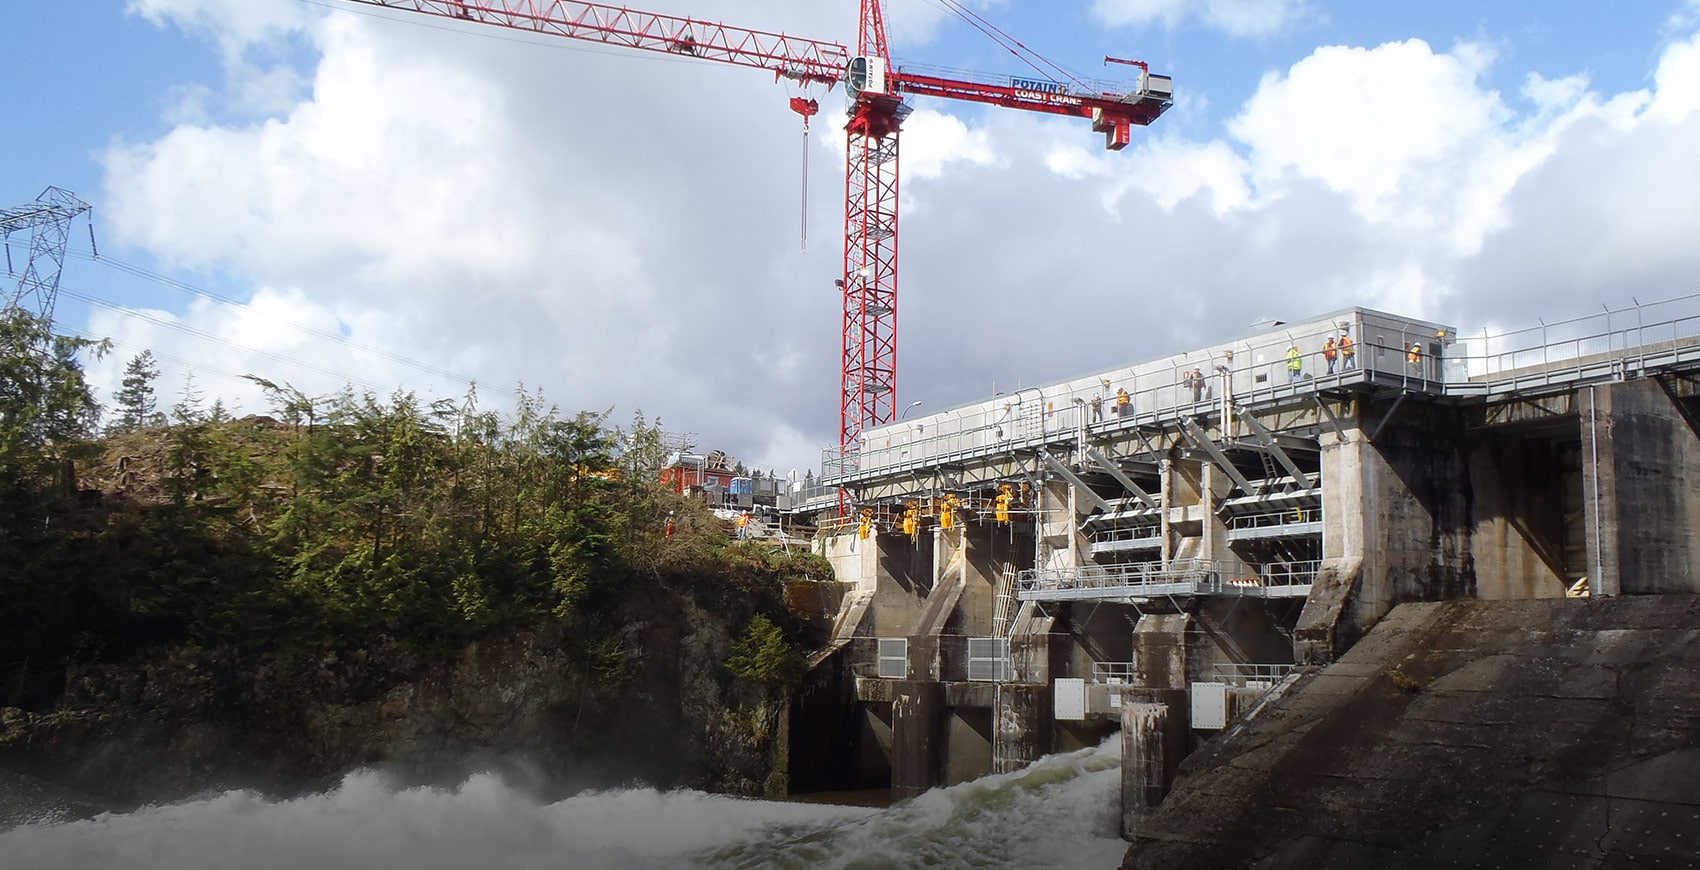 tower crane in picture of stave lake dam, water coming out spillway